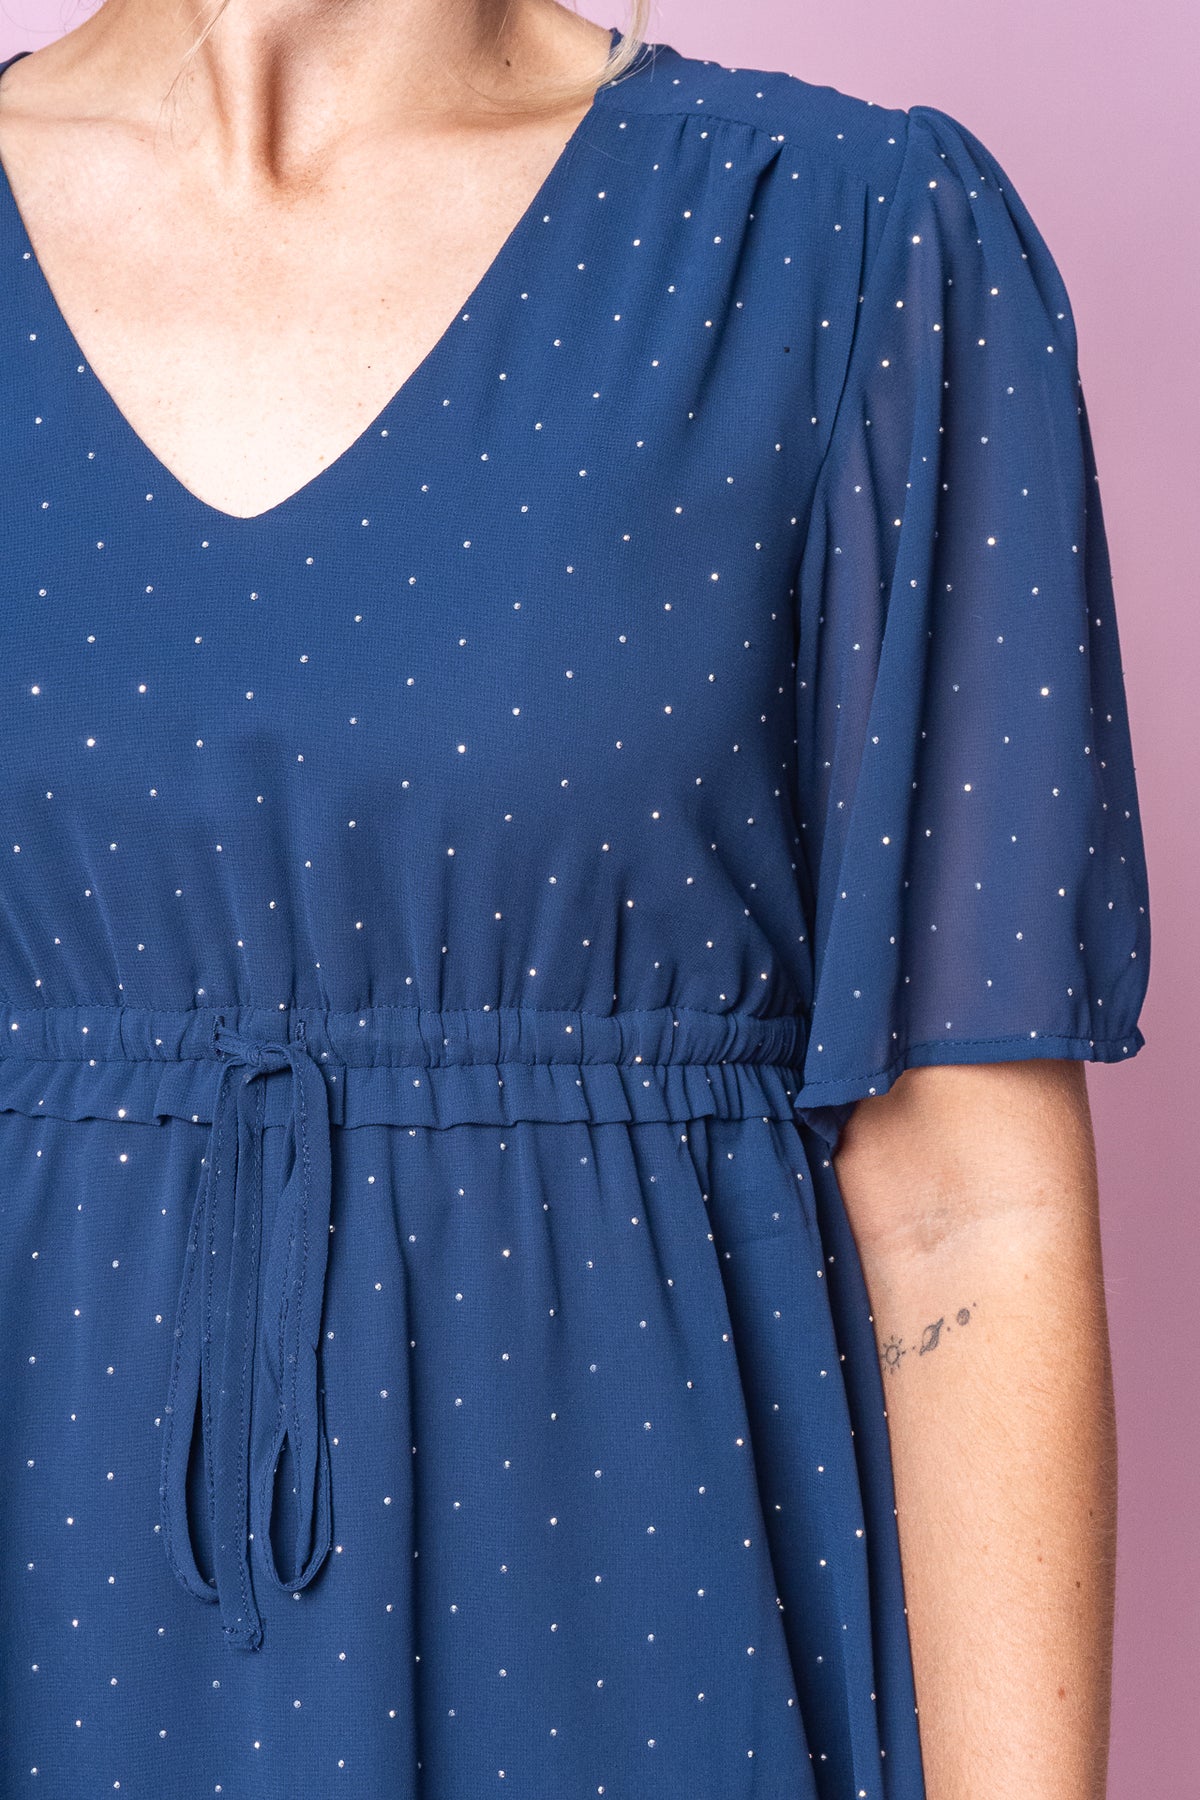 Indy Dress in Navy